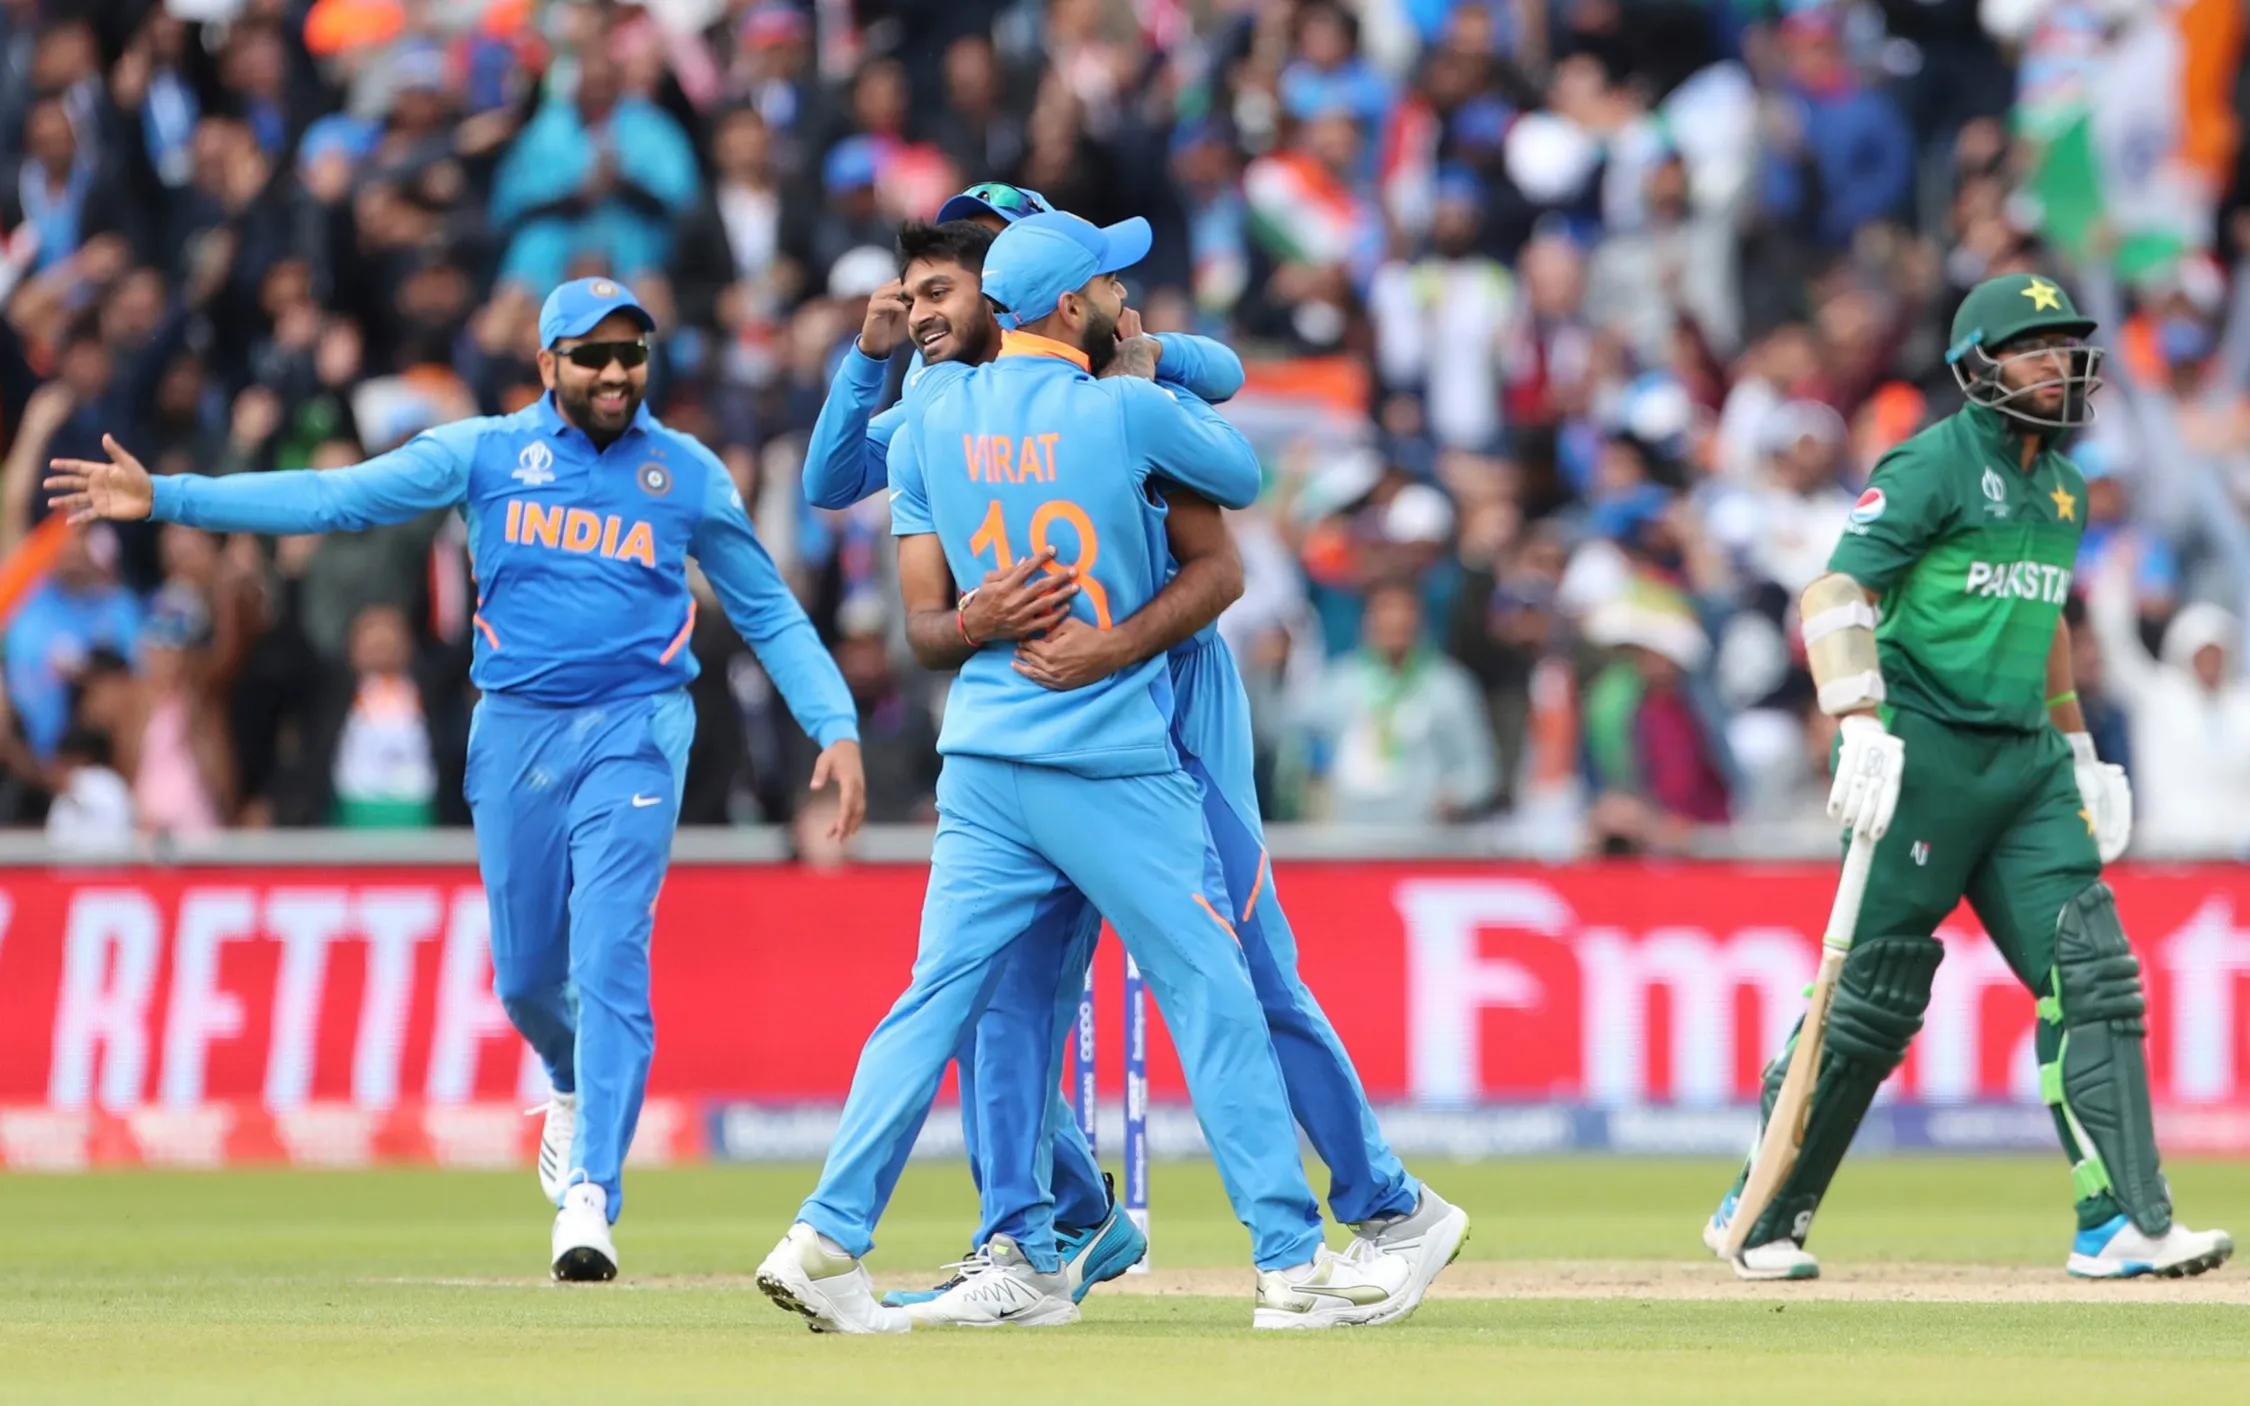 How about india pakistan cricket world cup 2023 tickets?